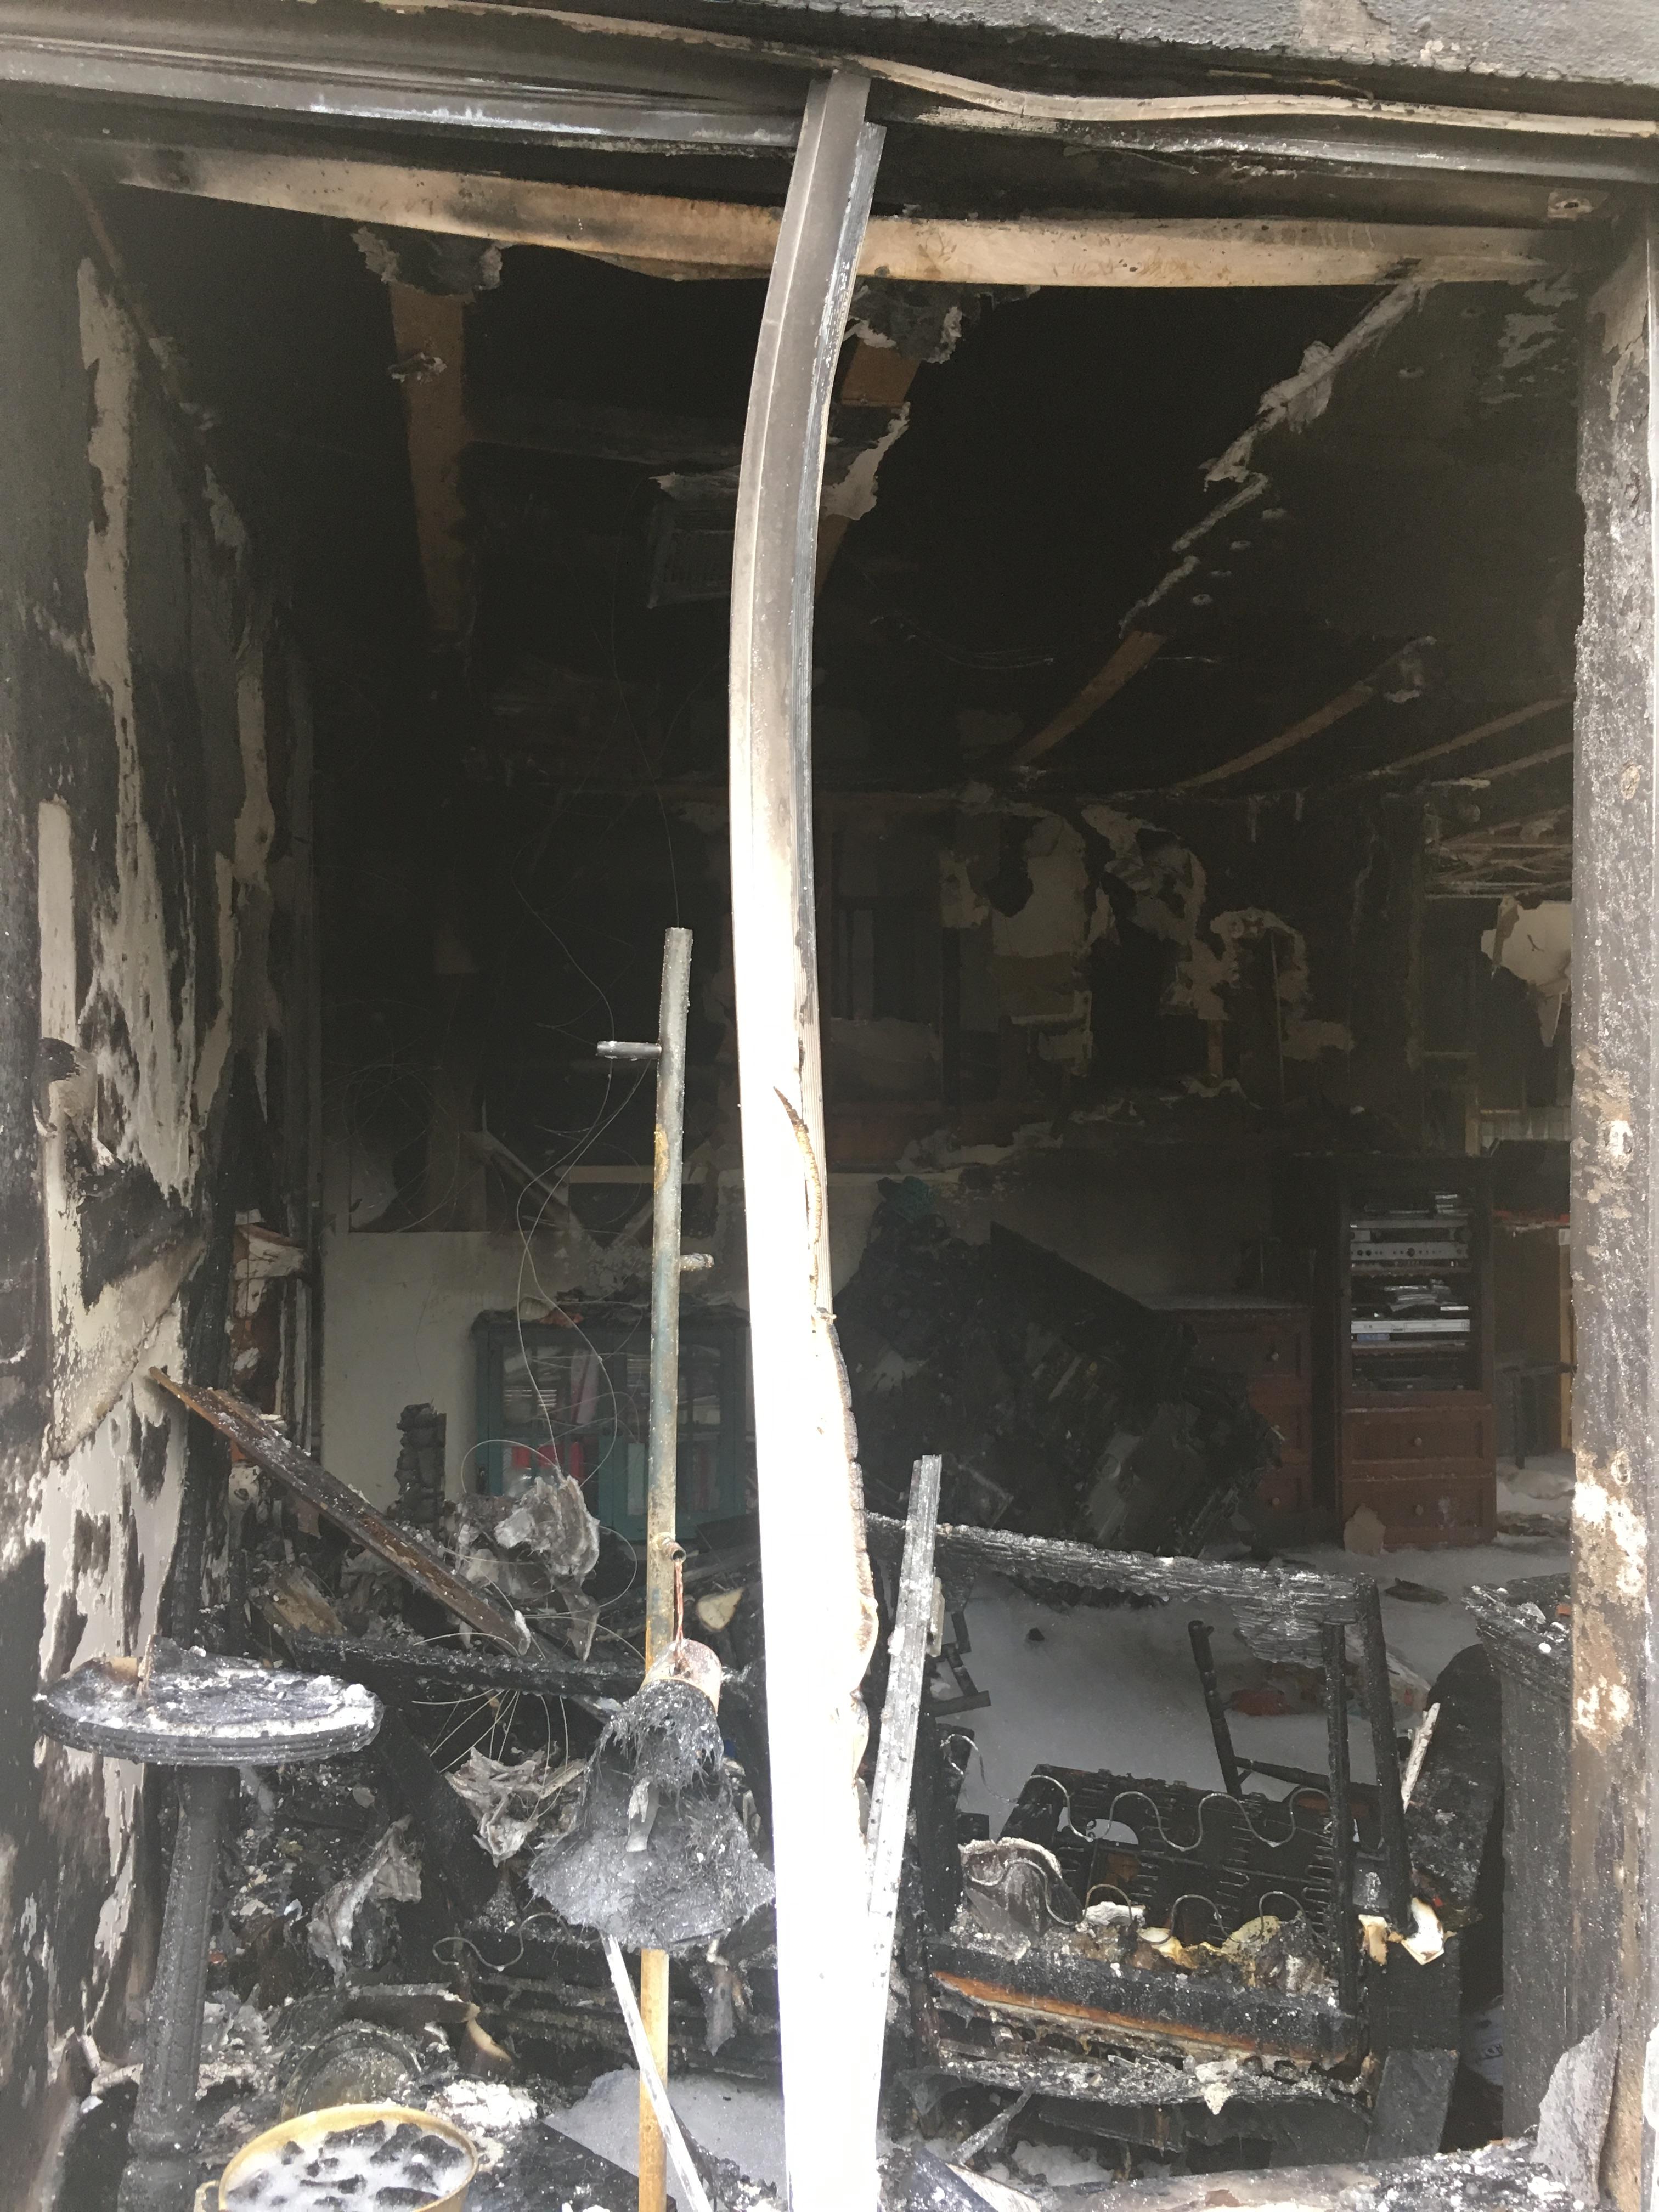 SERVPRO Antioch has the expertise to help you should have a fire in your home or business